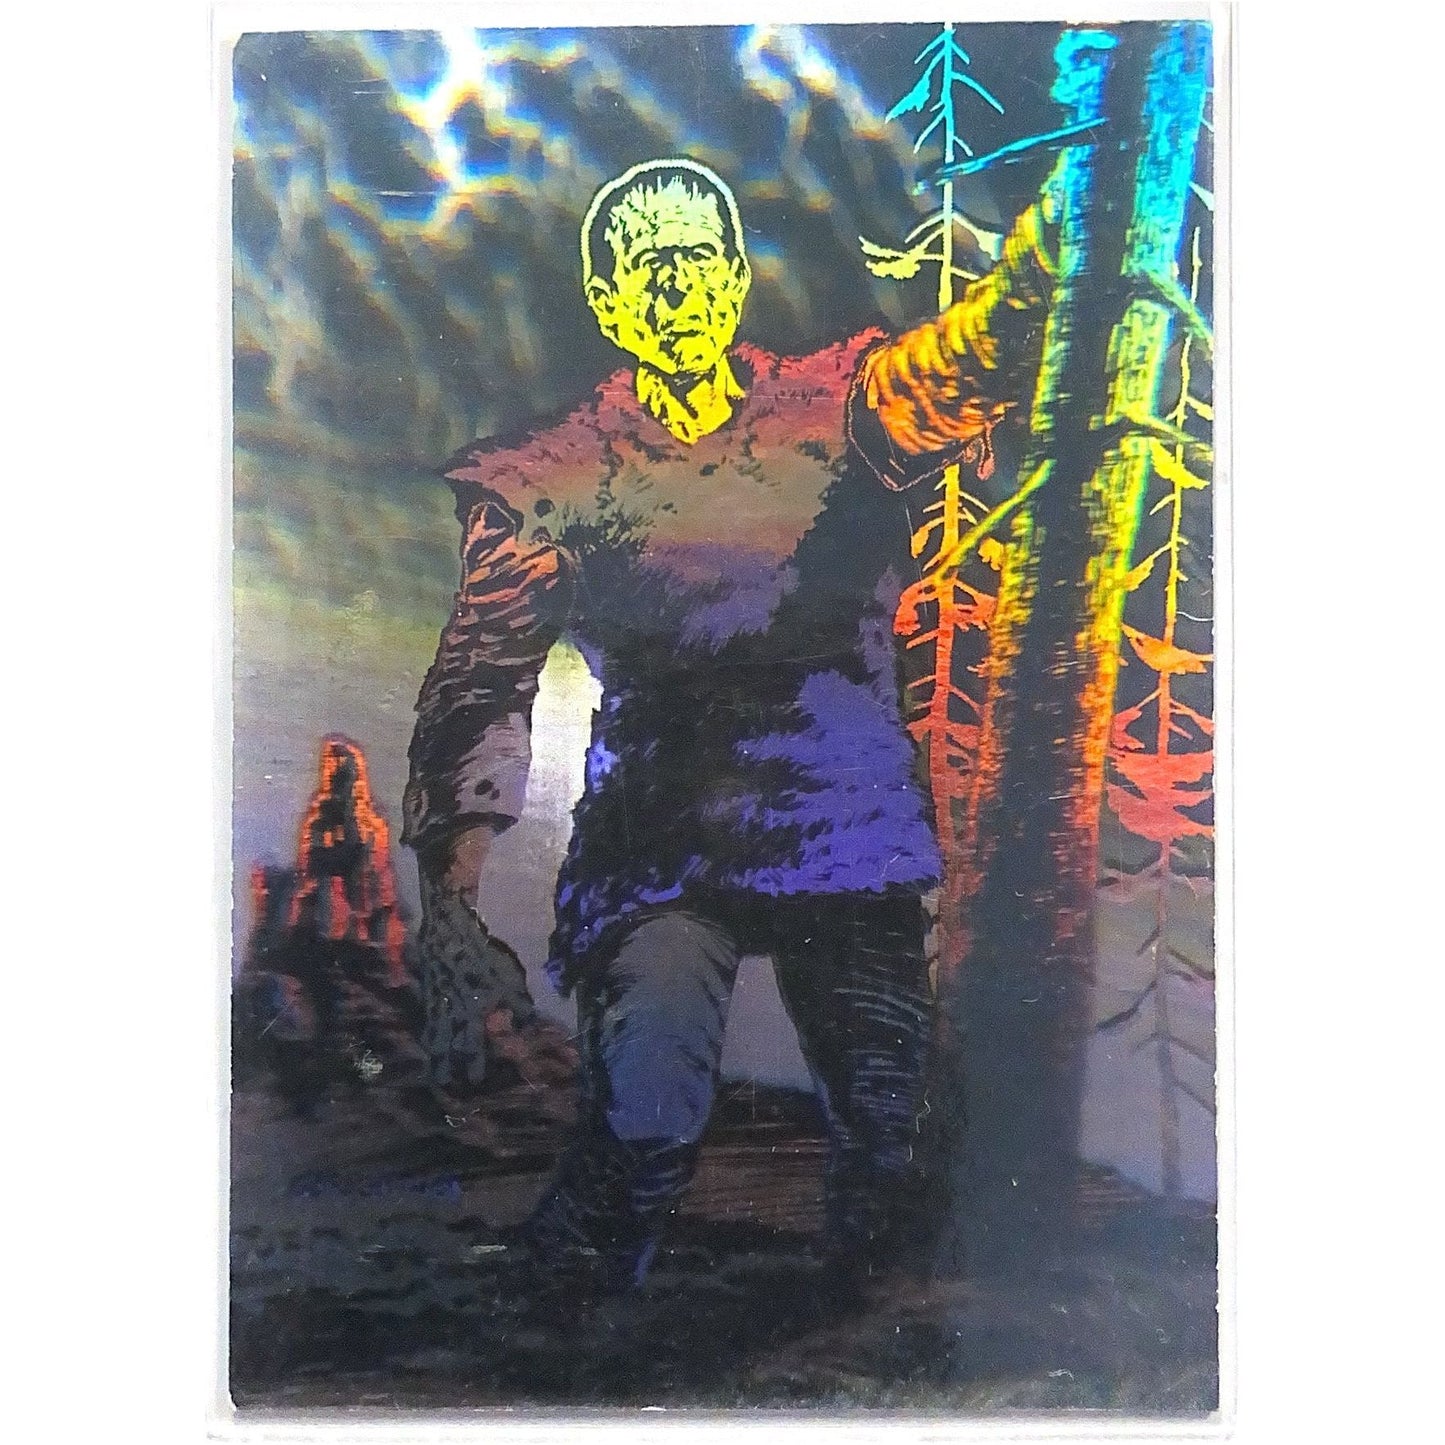  1993 FPG Bernie Wrightson “Master of the Macabre” Frankenstein Promo Hologram Card  Local Legends Cards & Collectibles